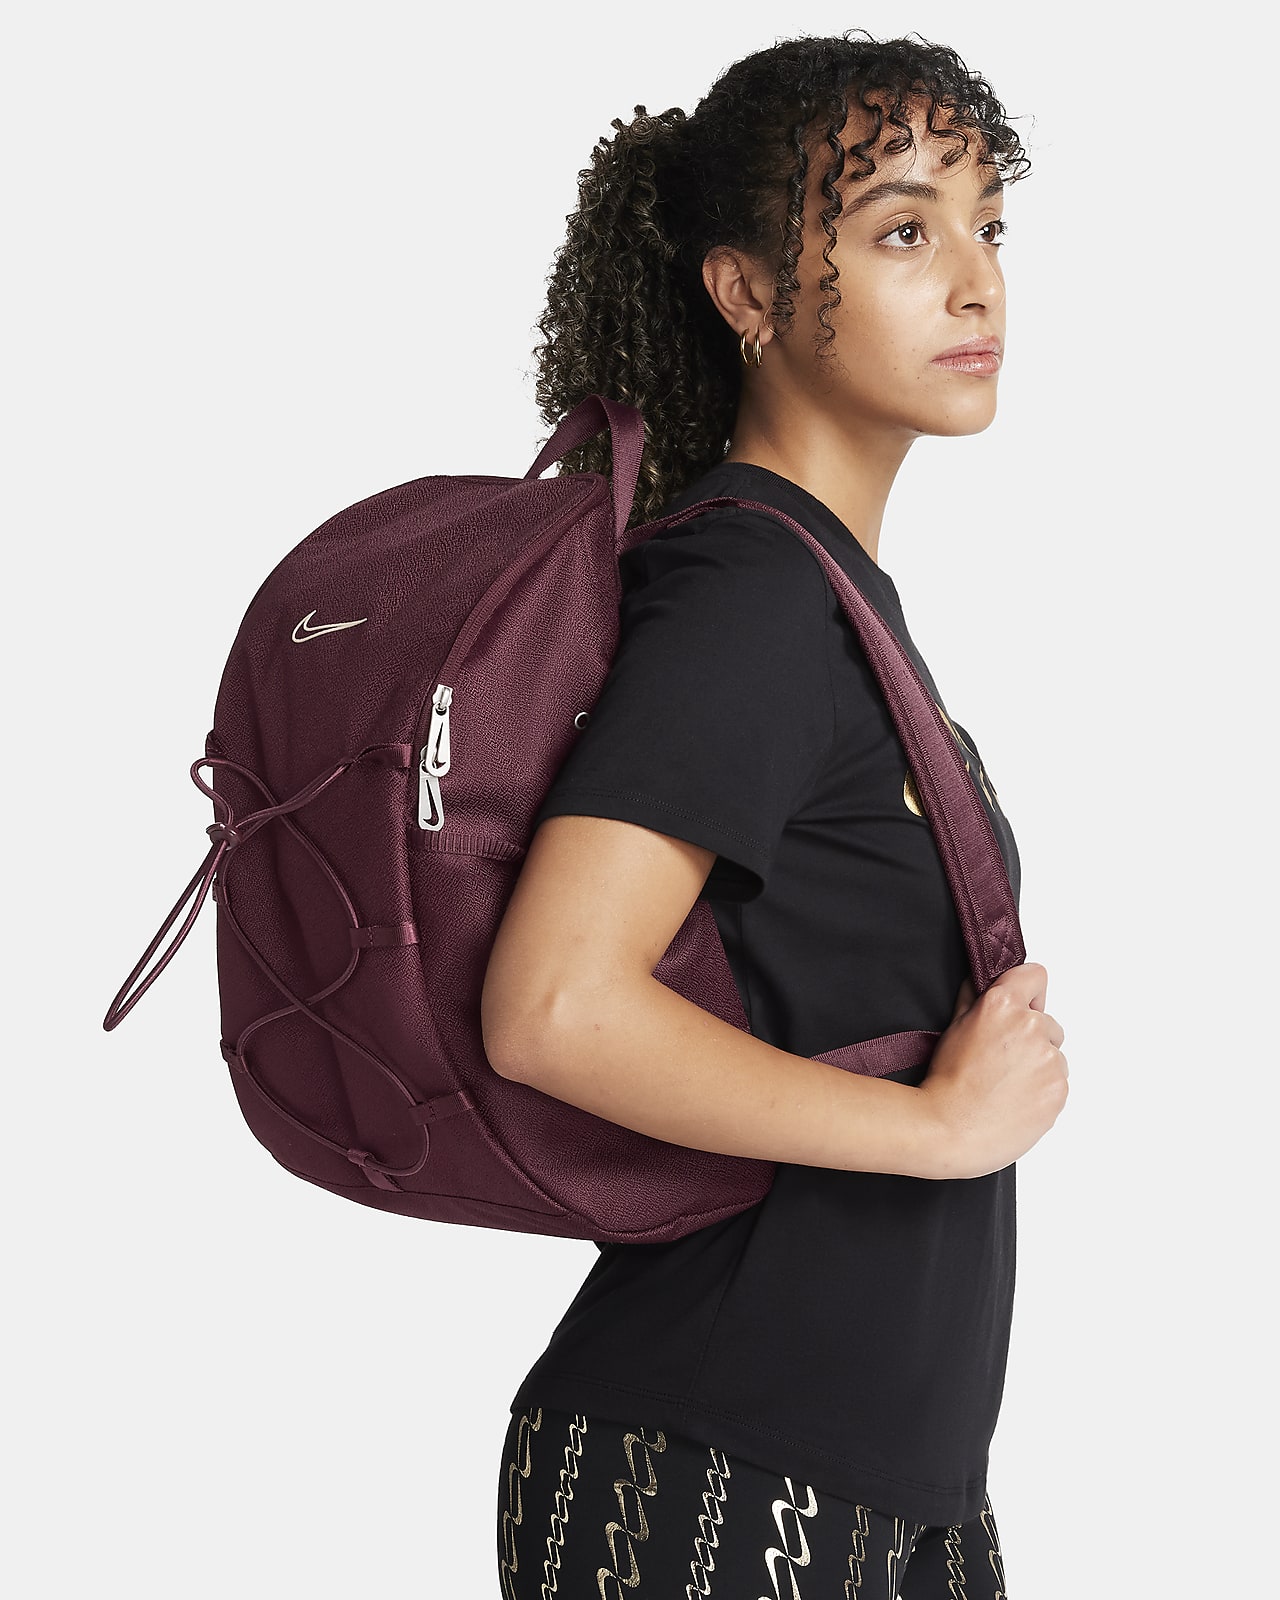 Nike One Luxe Backpack  Womens backpack, Backpacks, Workout clothes